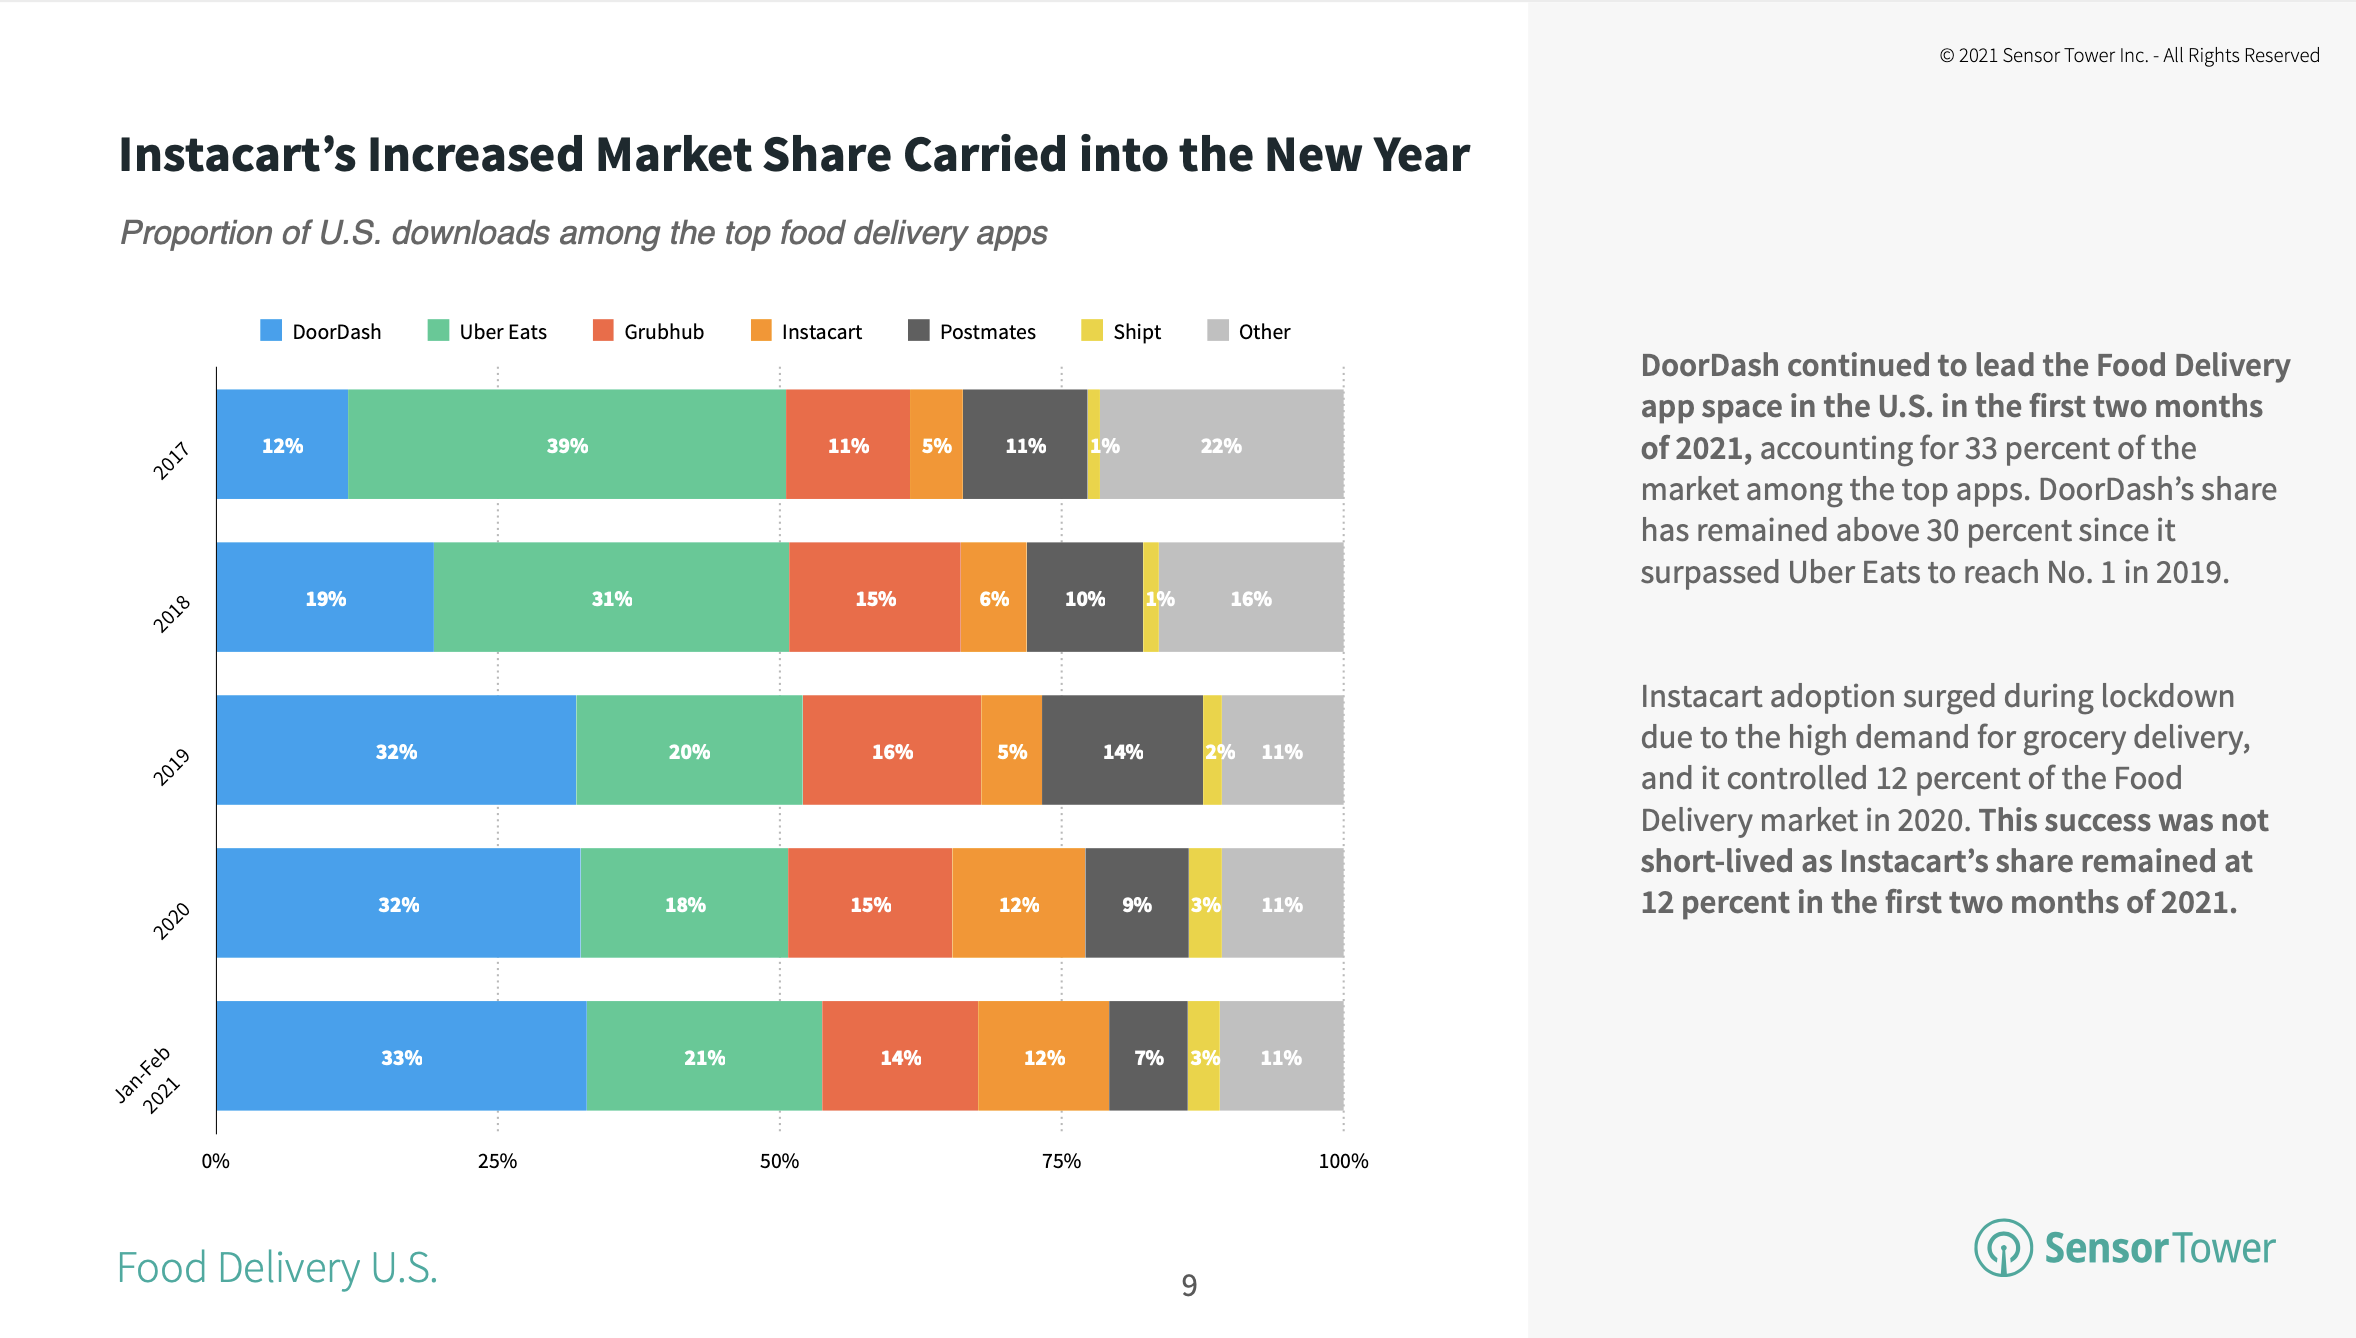 Instacart's 12 percent market share among top food delivery apps continues into 2021.